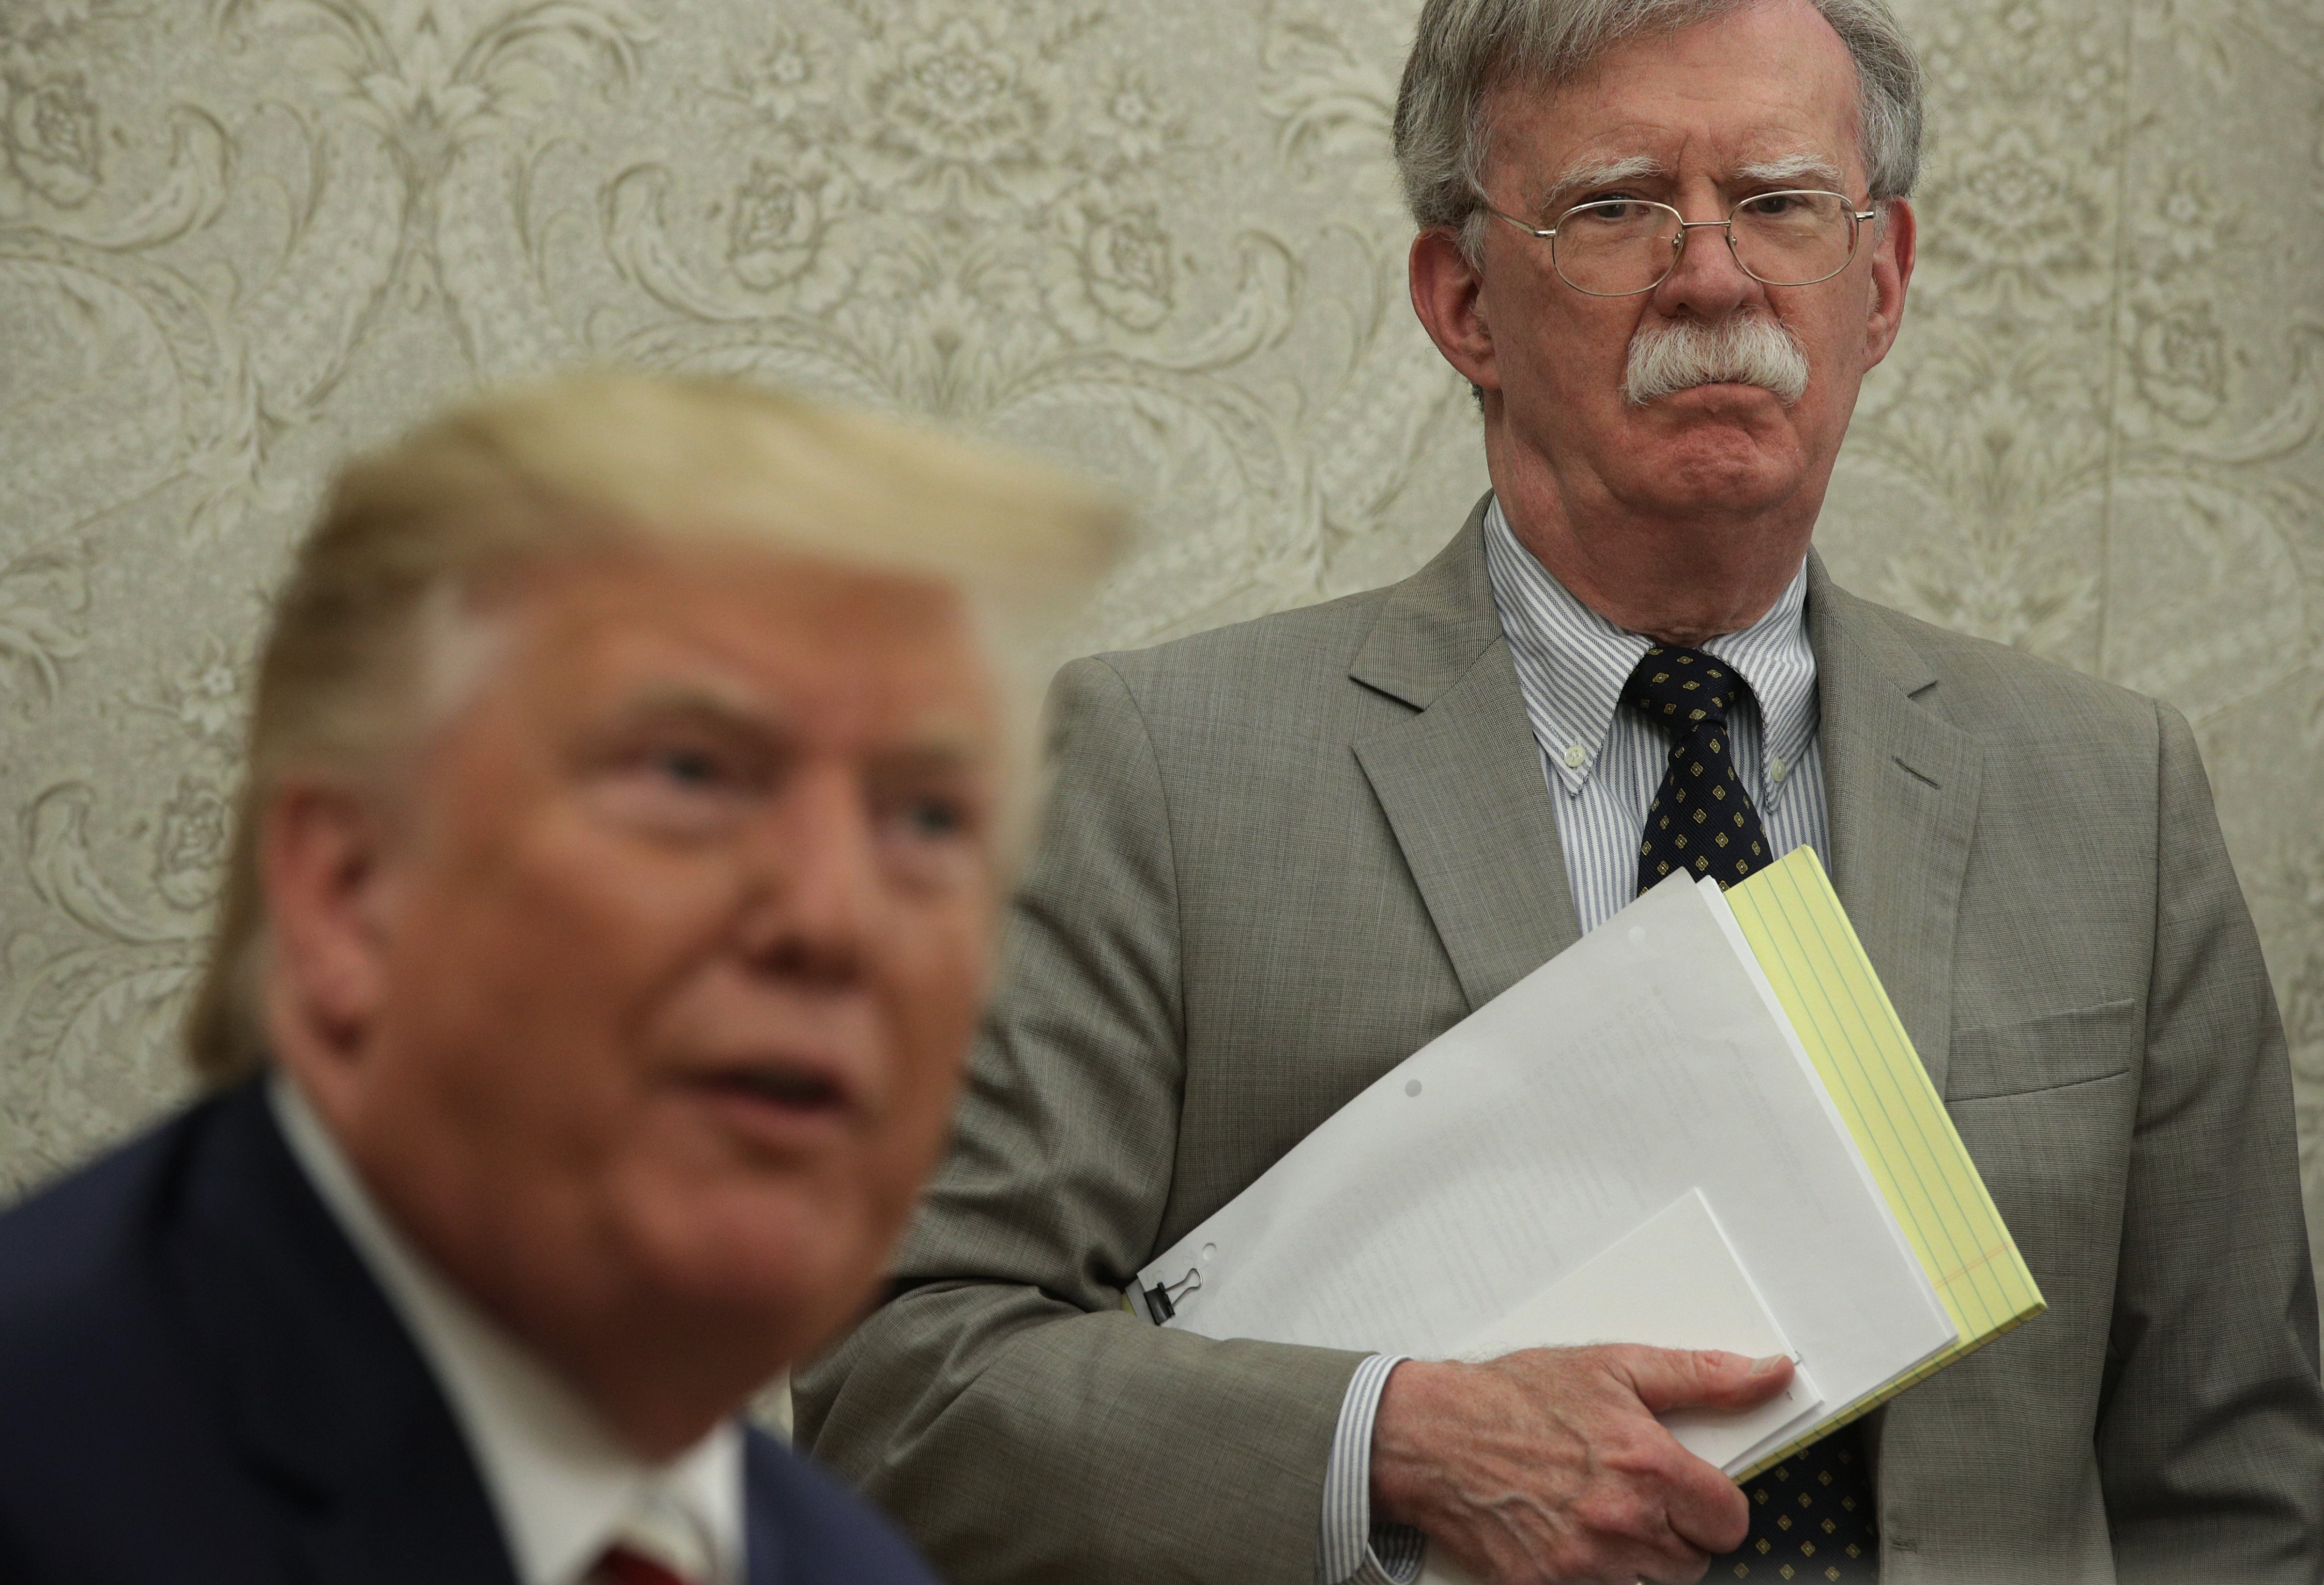 President Donald Trump speaks to members of the media as National Security Adviser John Bolton listens during a meeting with President of Romania Klaus Iohannis in the Oval Office of the White House on Aug. 20, 2019 in Washington, D.C. (Alex Wong&mdash;Getty Images)